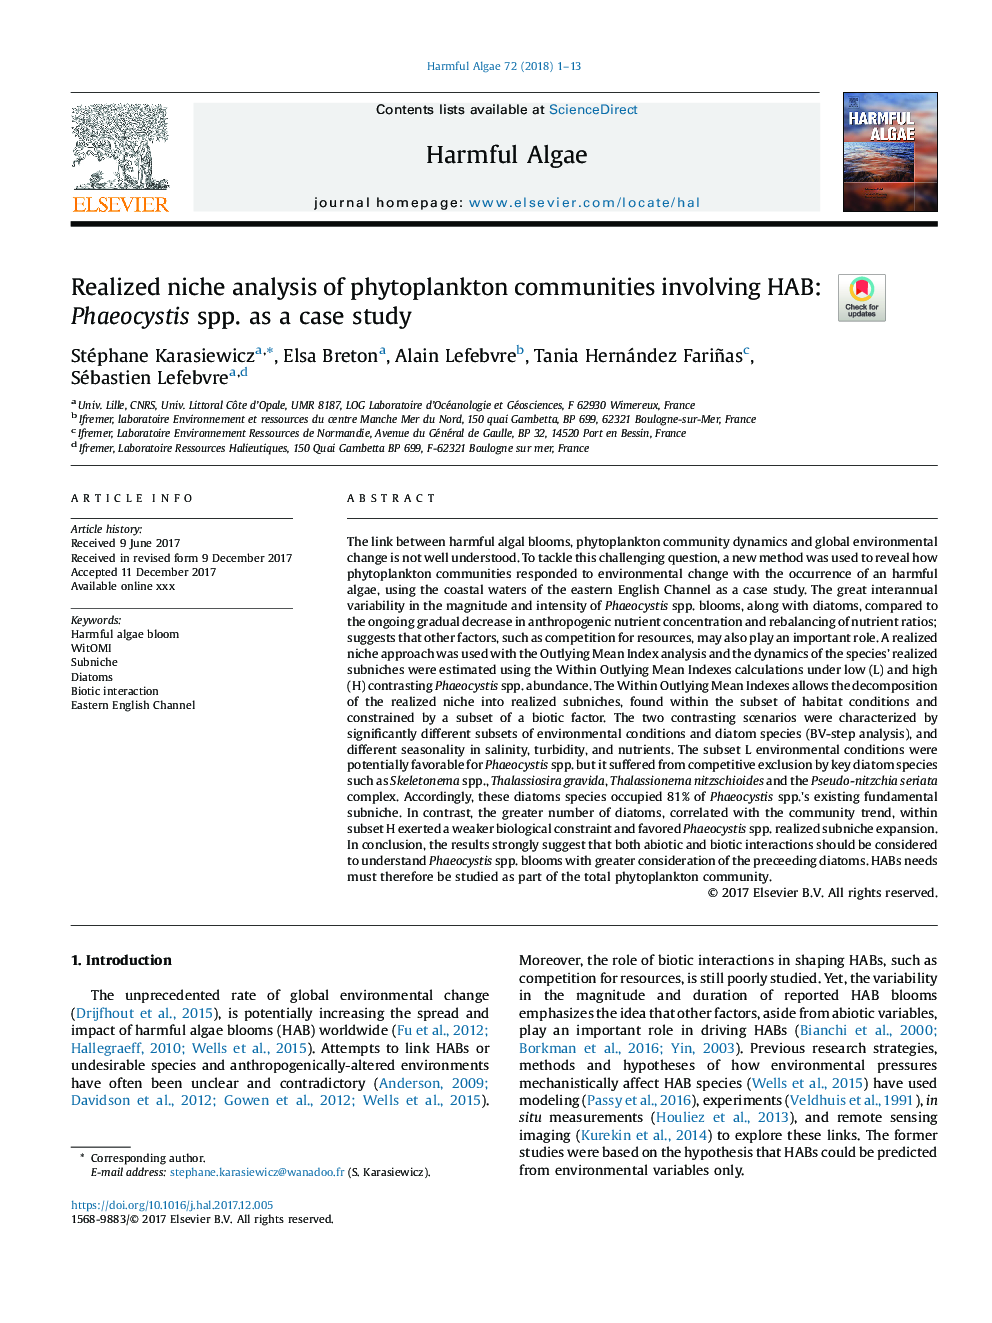 Realized niche analysis of phytoplankton communities involving HAB: Phaeocystis spp. as a case study